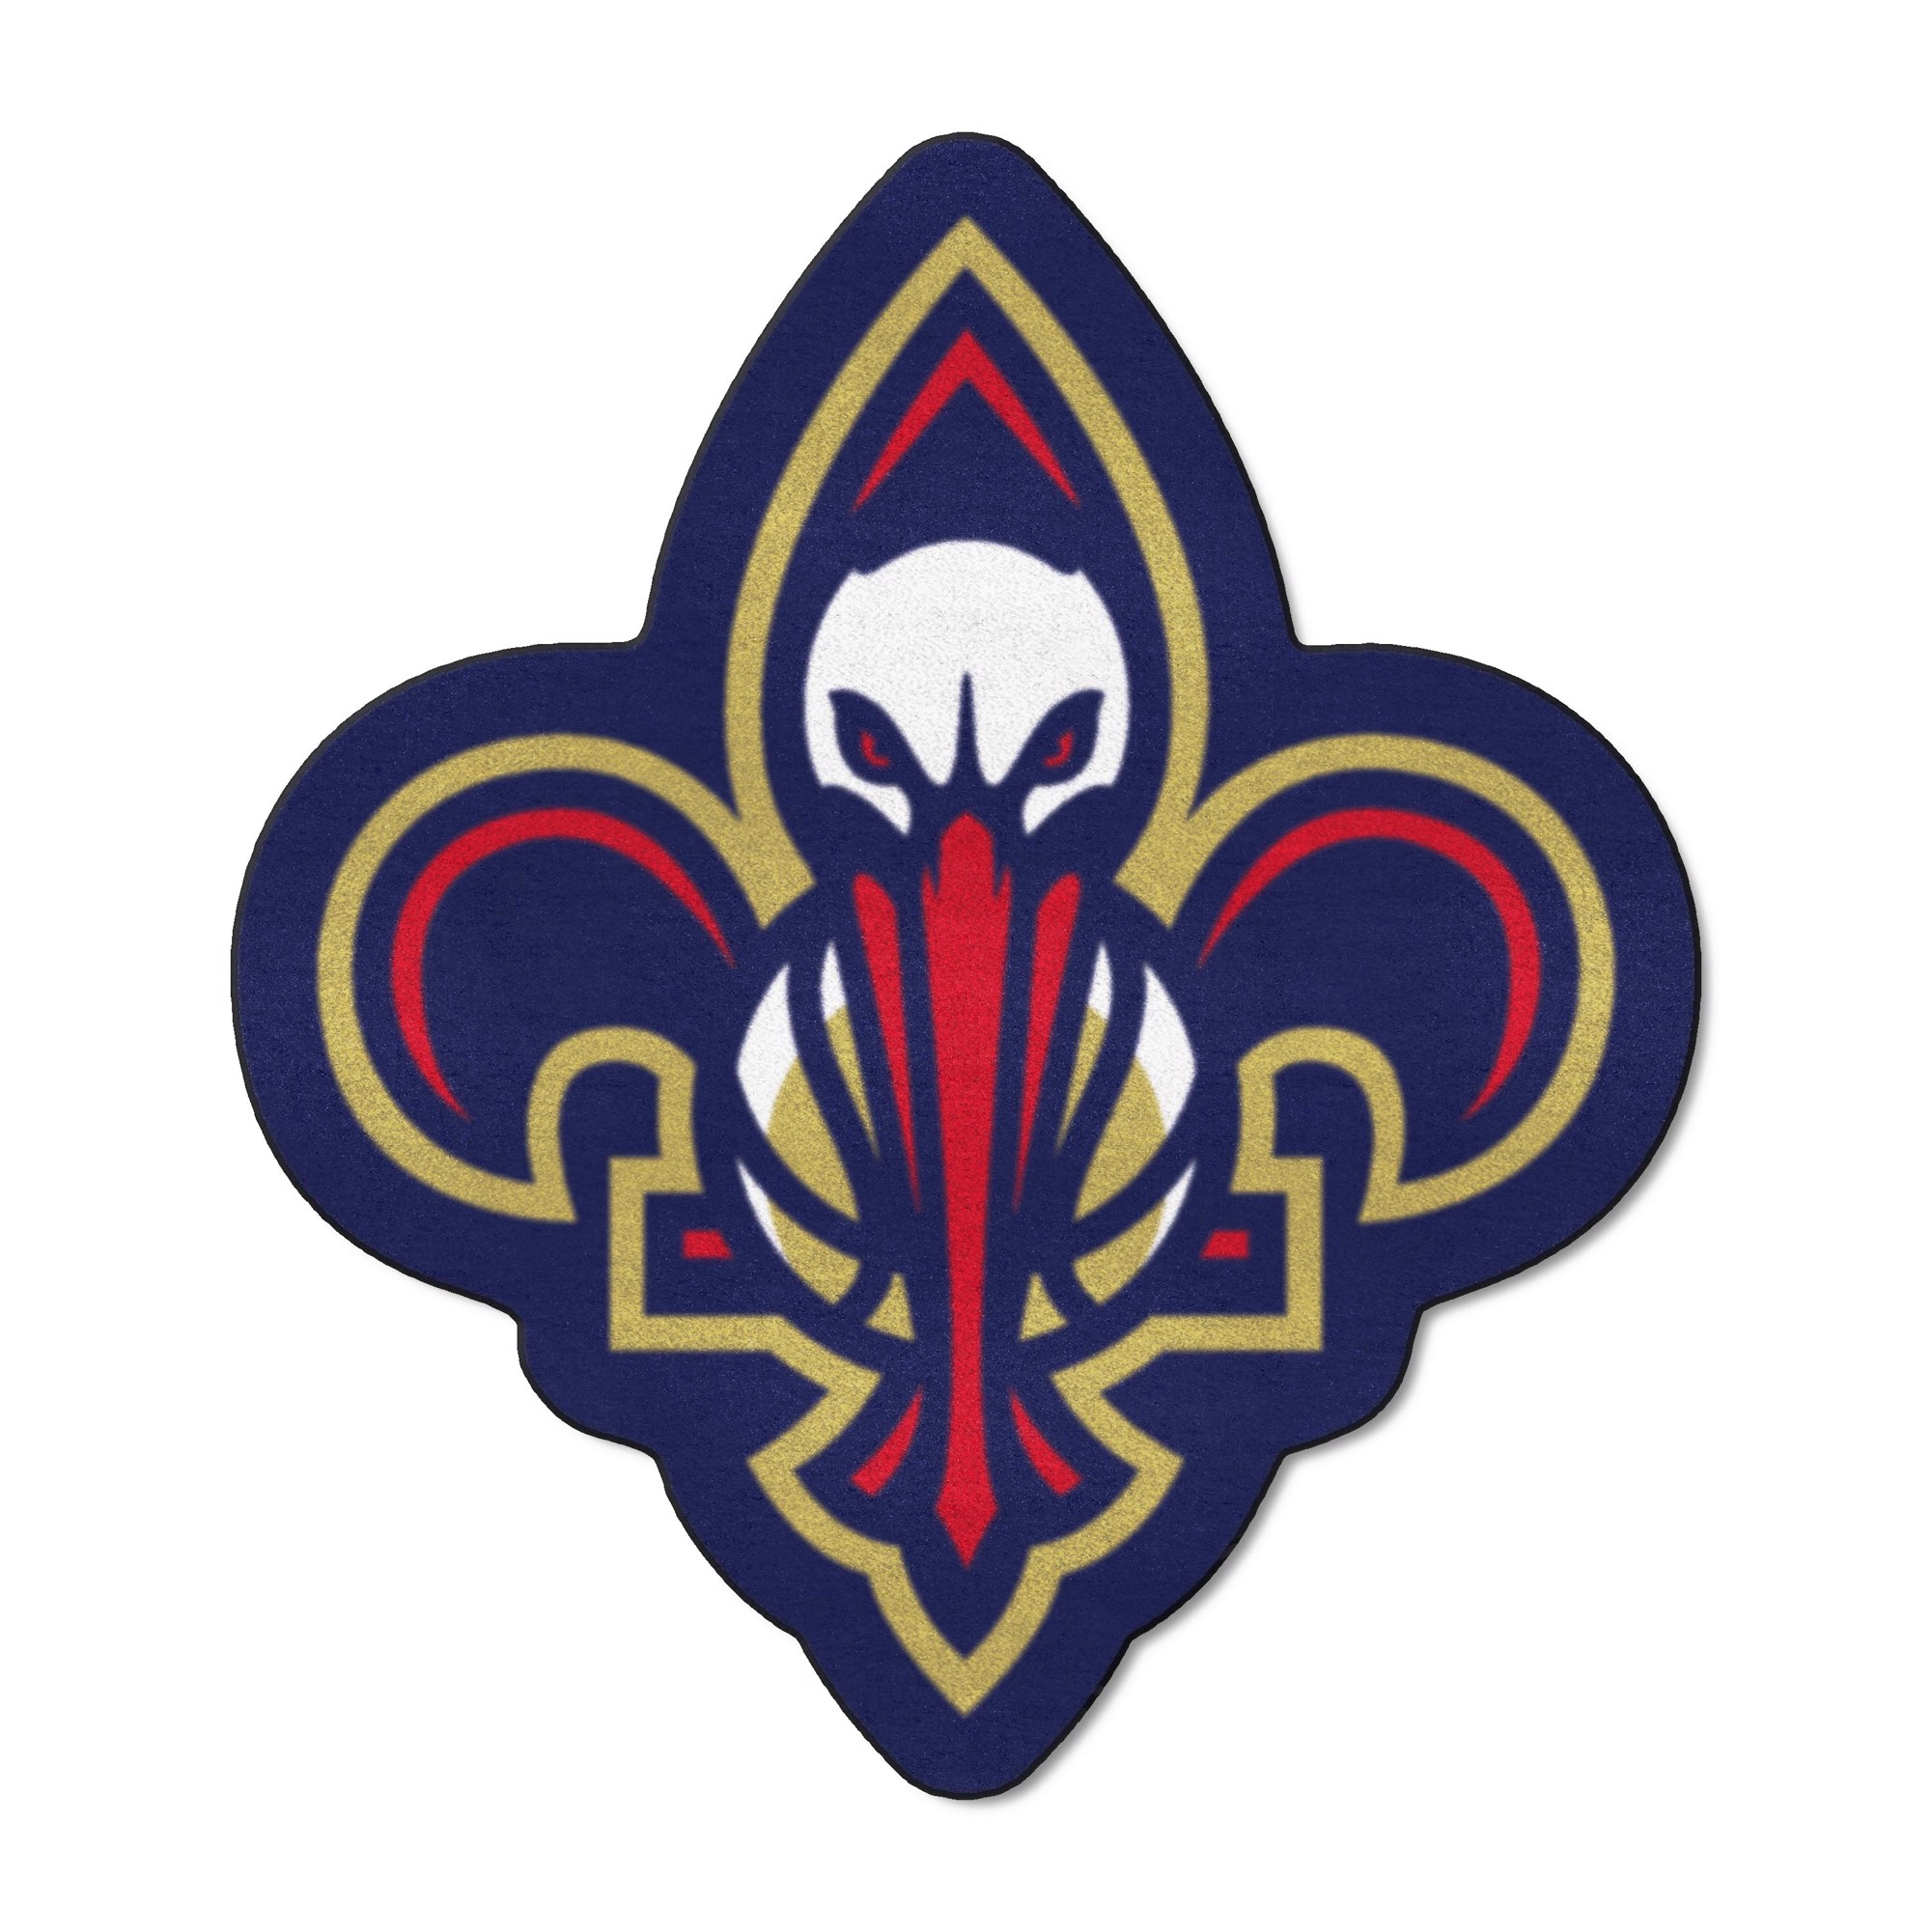 New Orleans Pelicans Colors - Reds Army